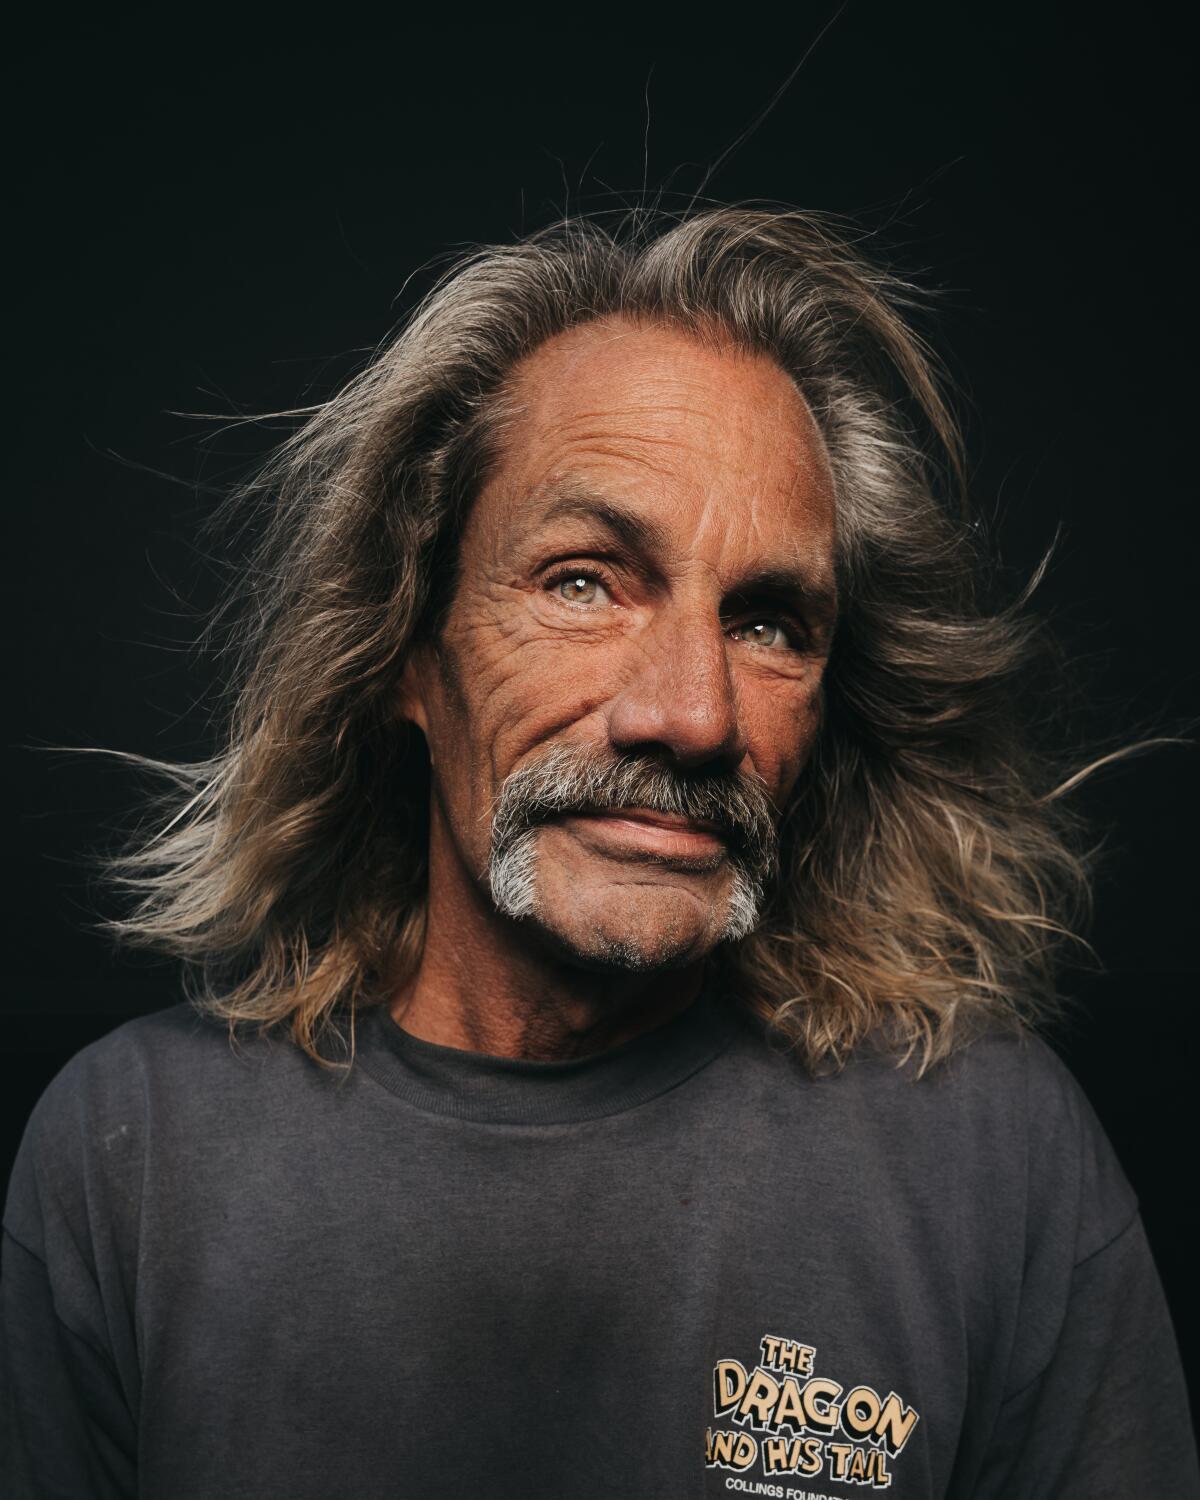 A photo of a homeless man named James is part of an exhibition at the La Jolla/Riford Library through Saturday, Oct. 15.